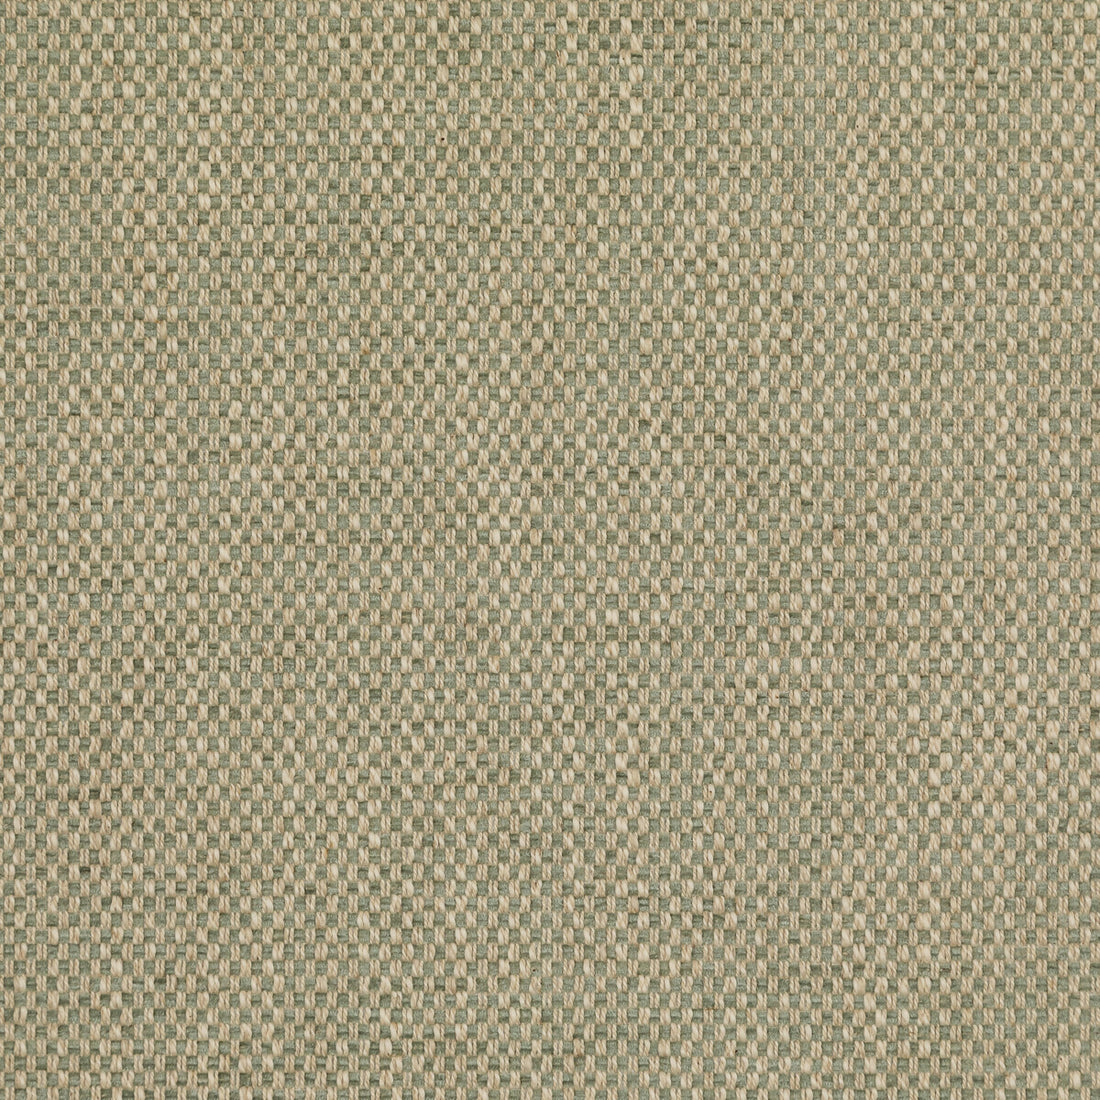 Carlton fabric in celadon color - pattern BFC-3692.123.0 - by Lee Jofa in the Blithfield collection